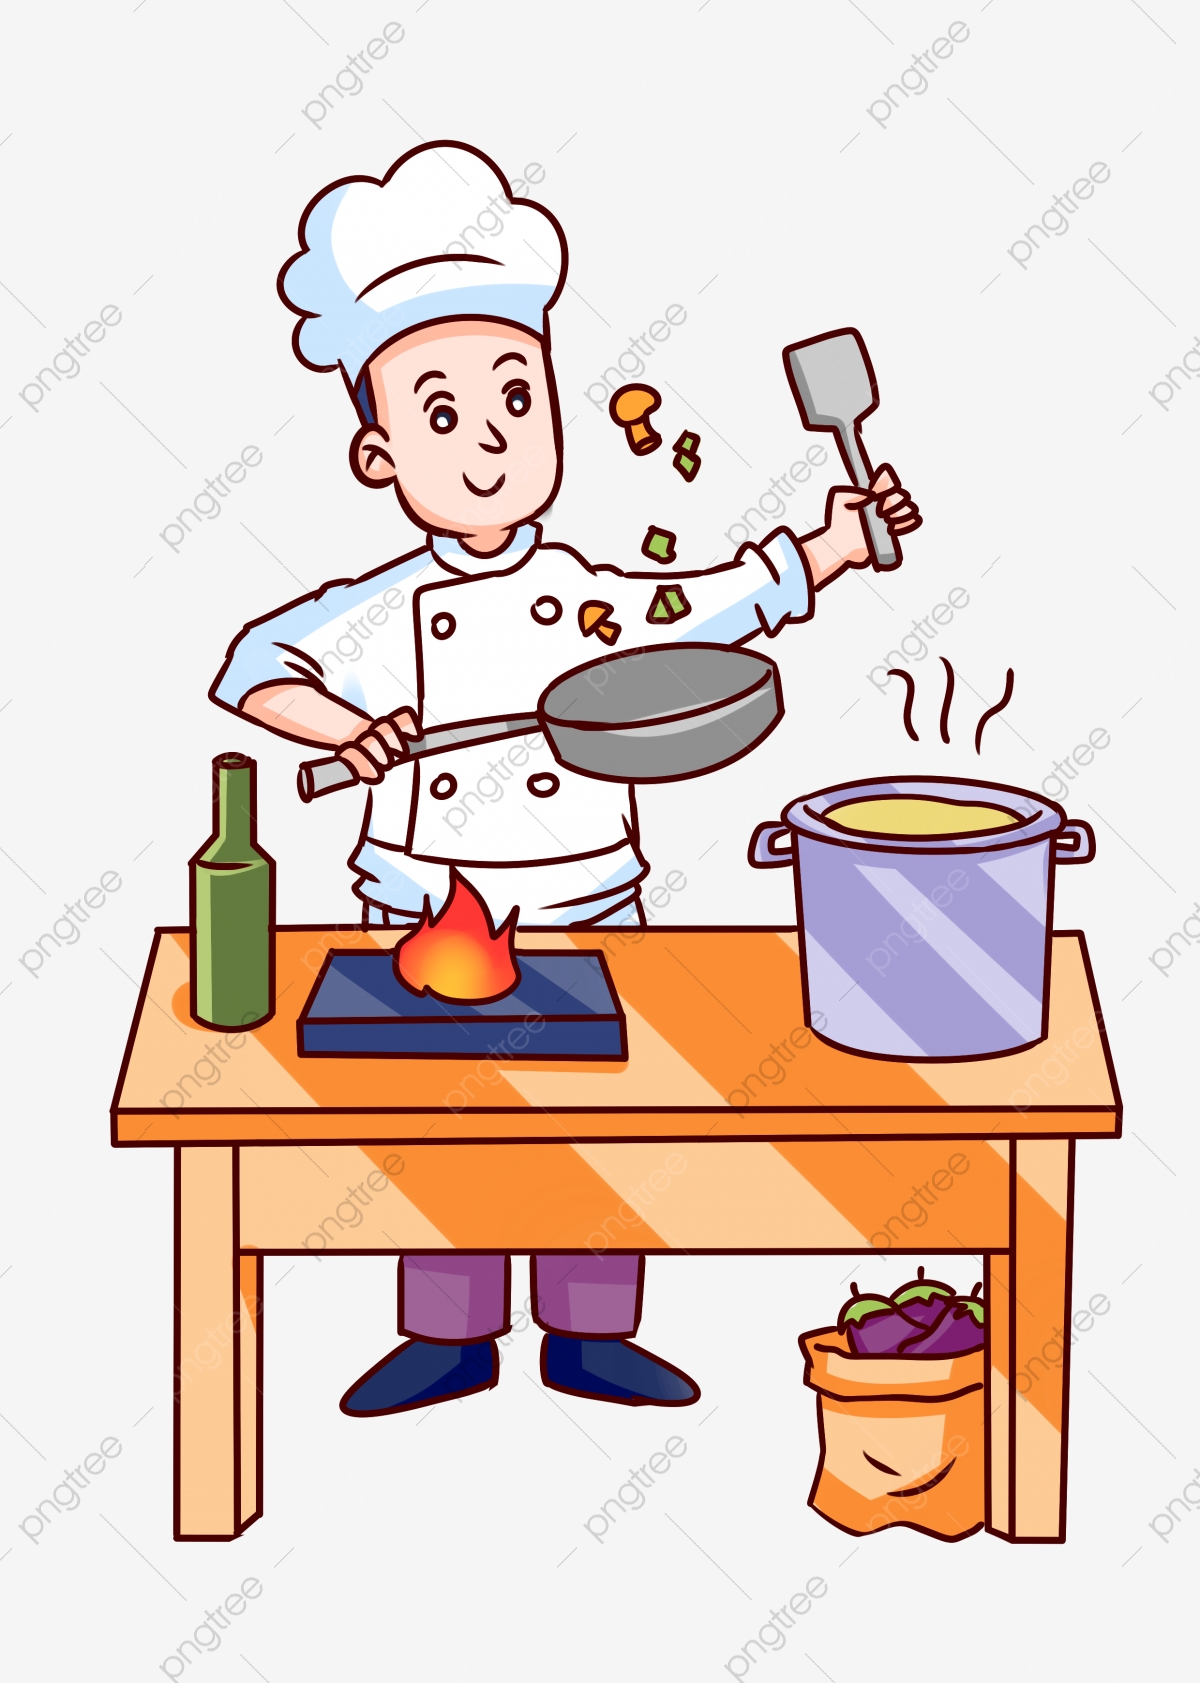 Cooking clipart fry cook, Cooking fry cook Transparent FREE for ...